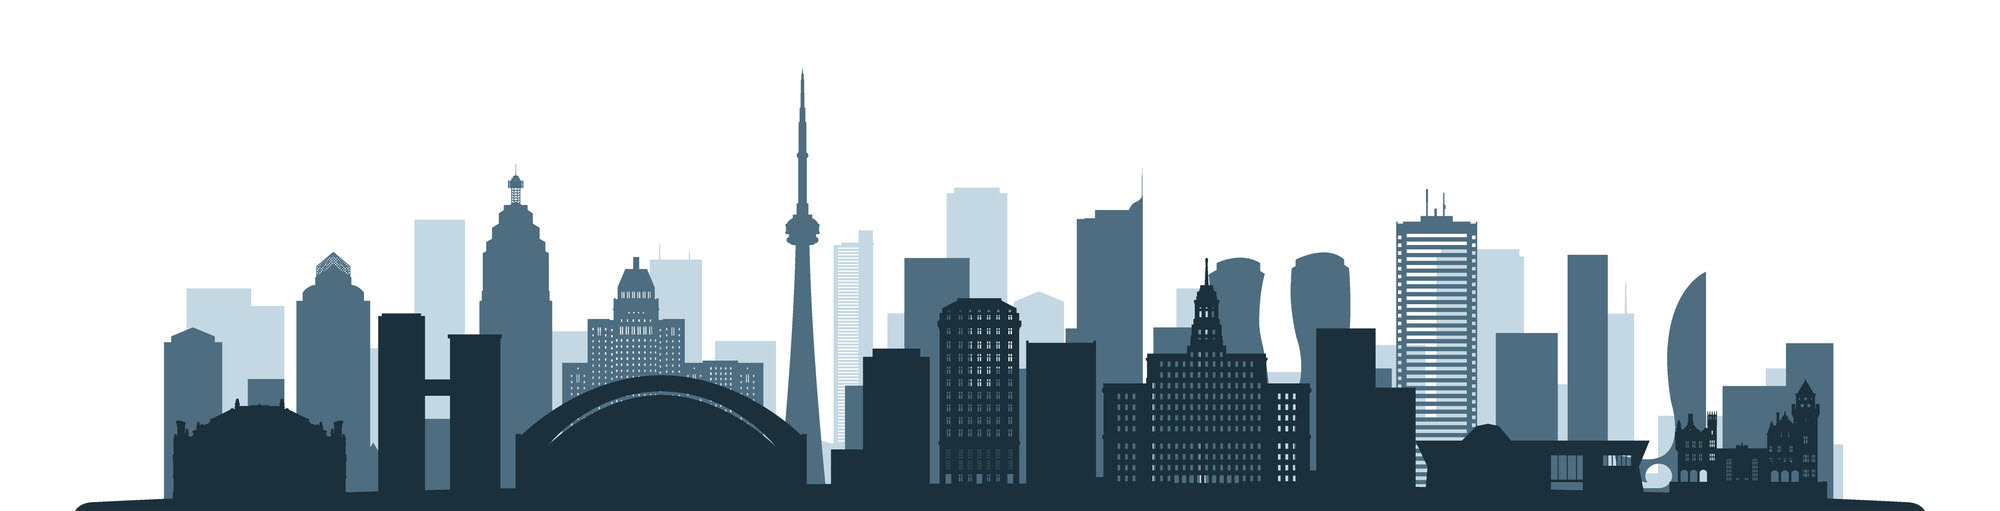 Managed IT Services in Toronto and the GTA